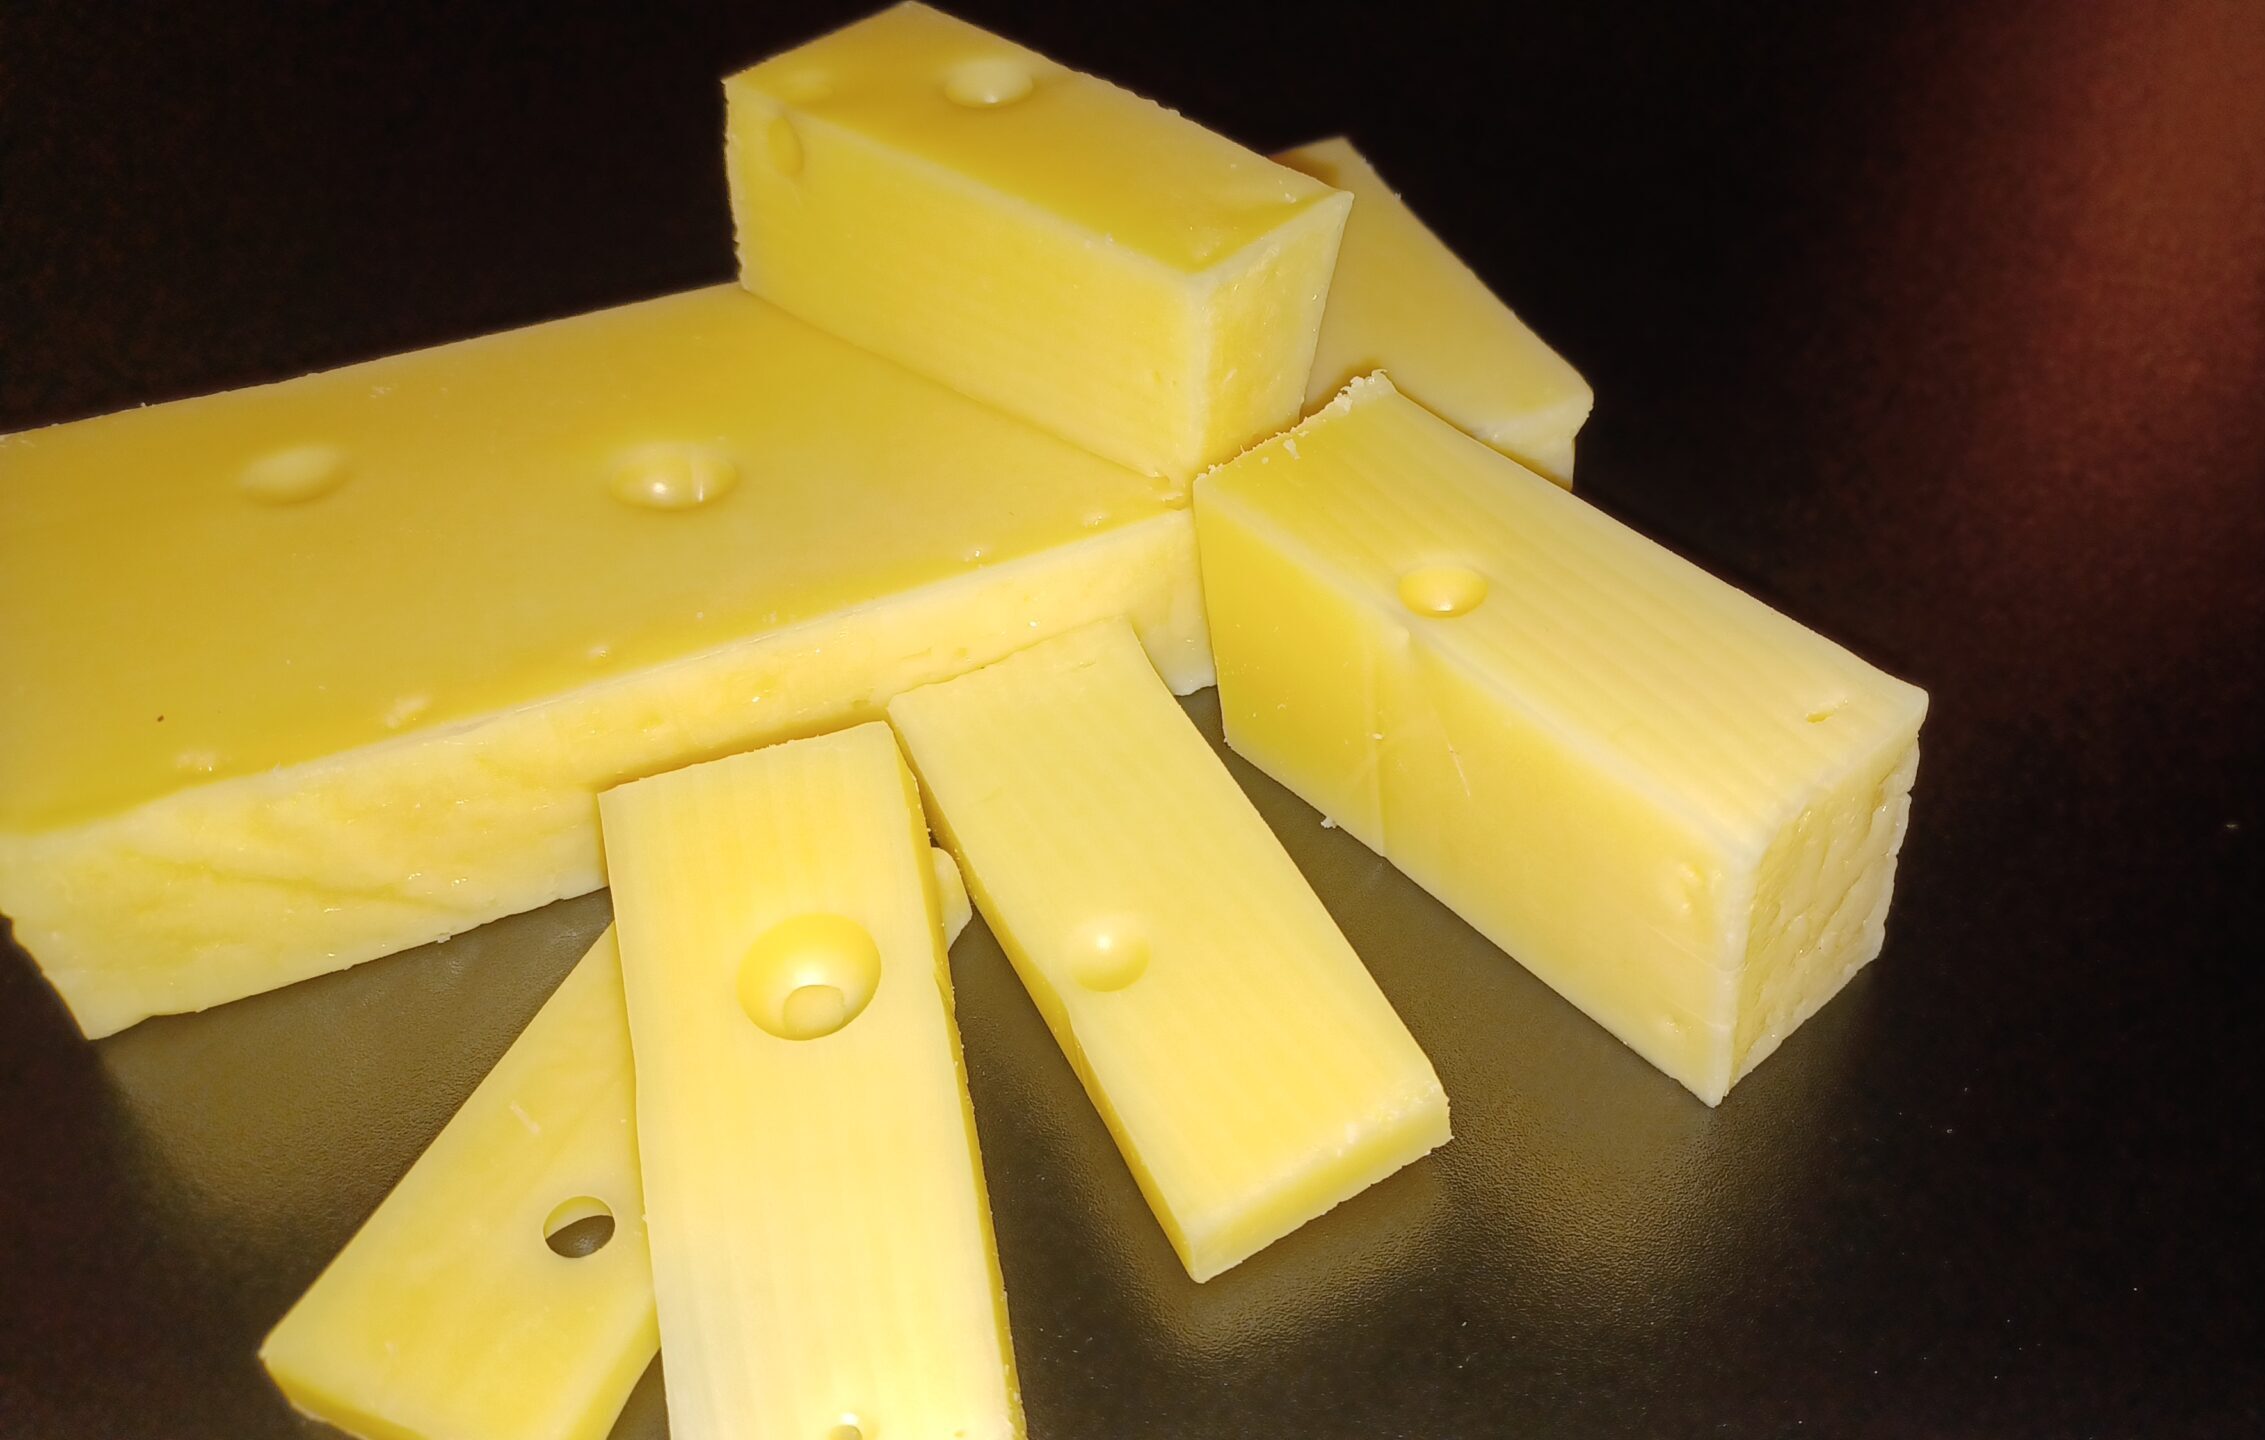 Picture of cheese as example for taxes on a loss